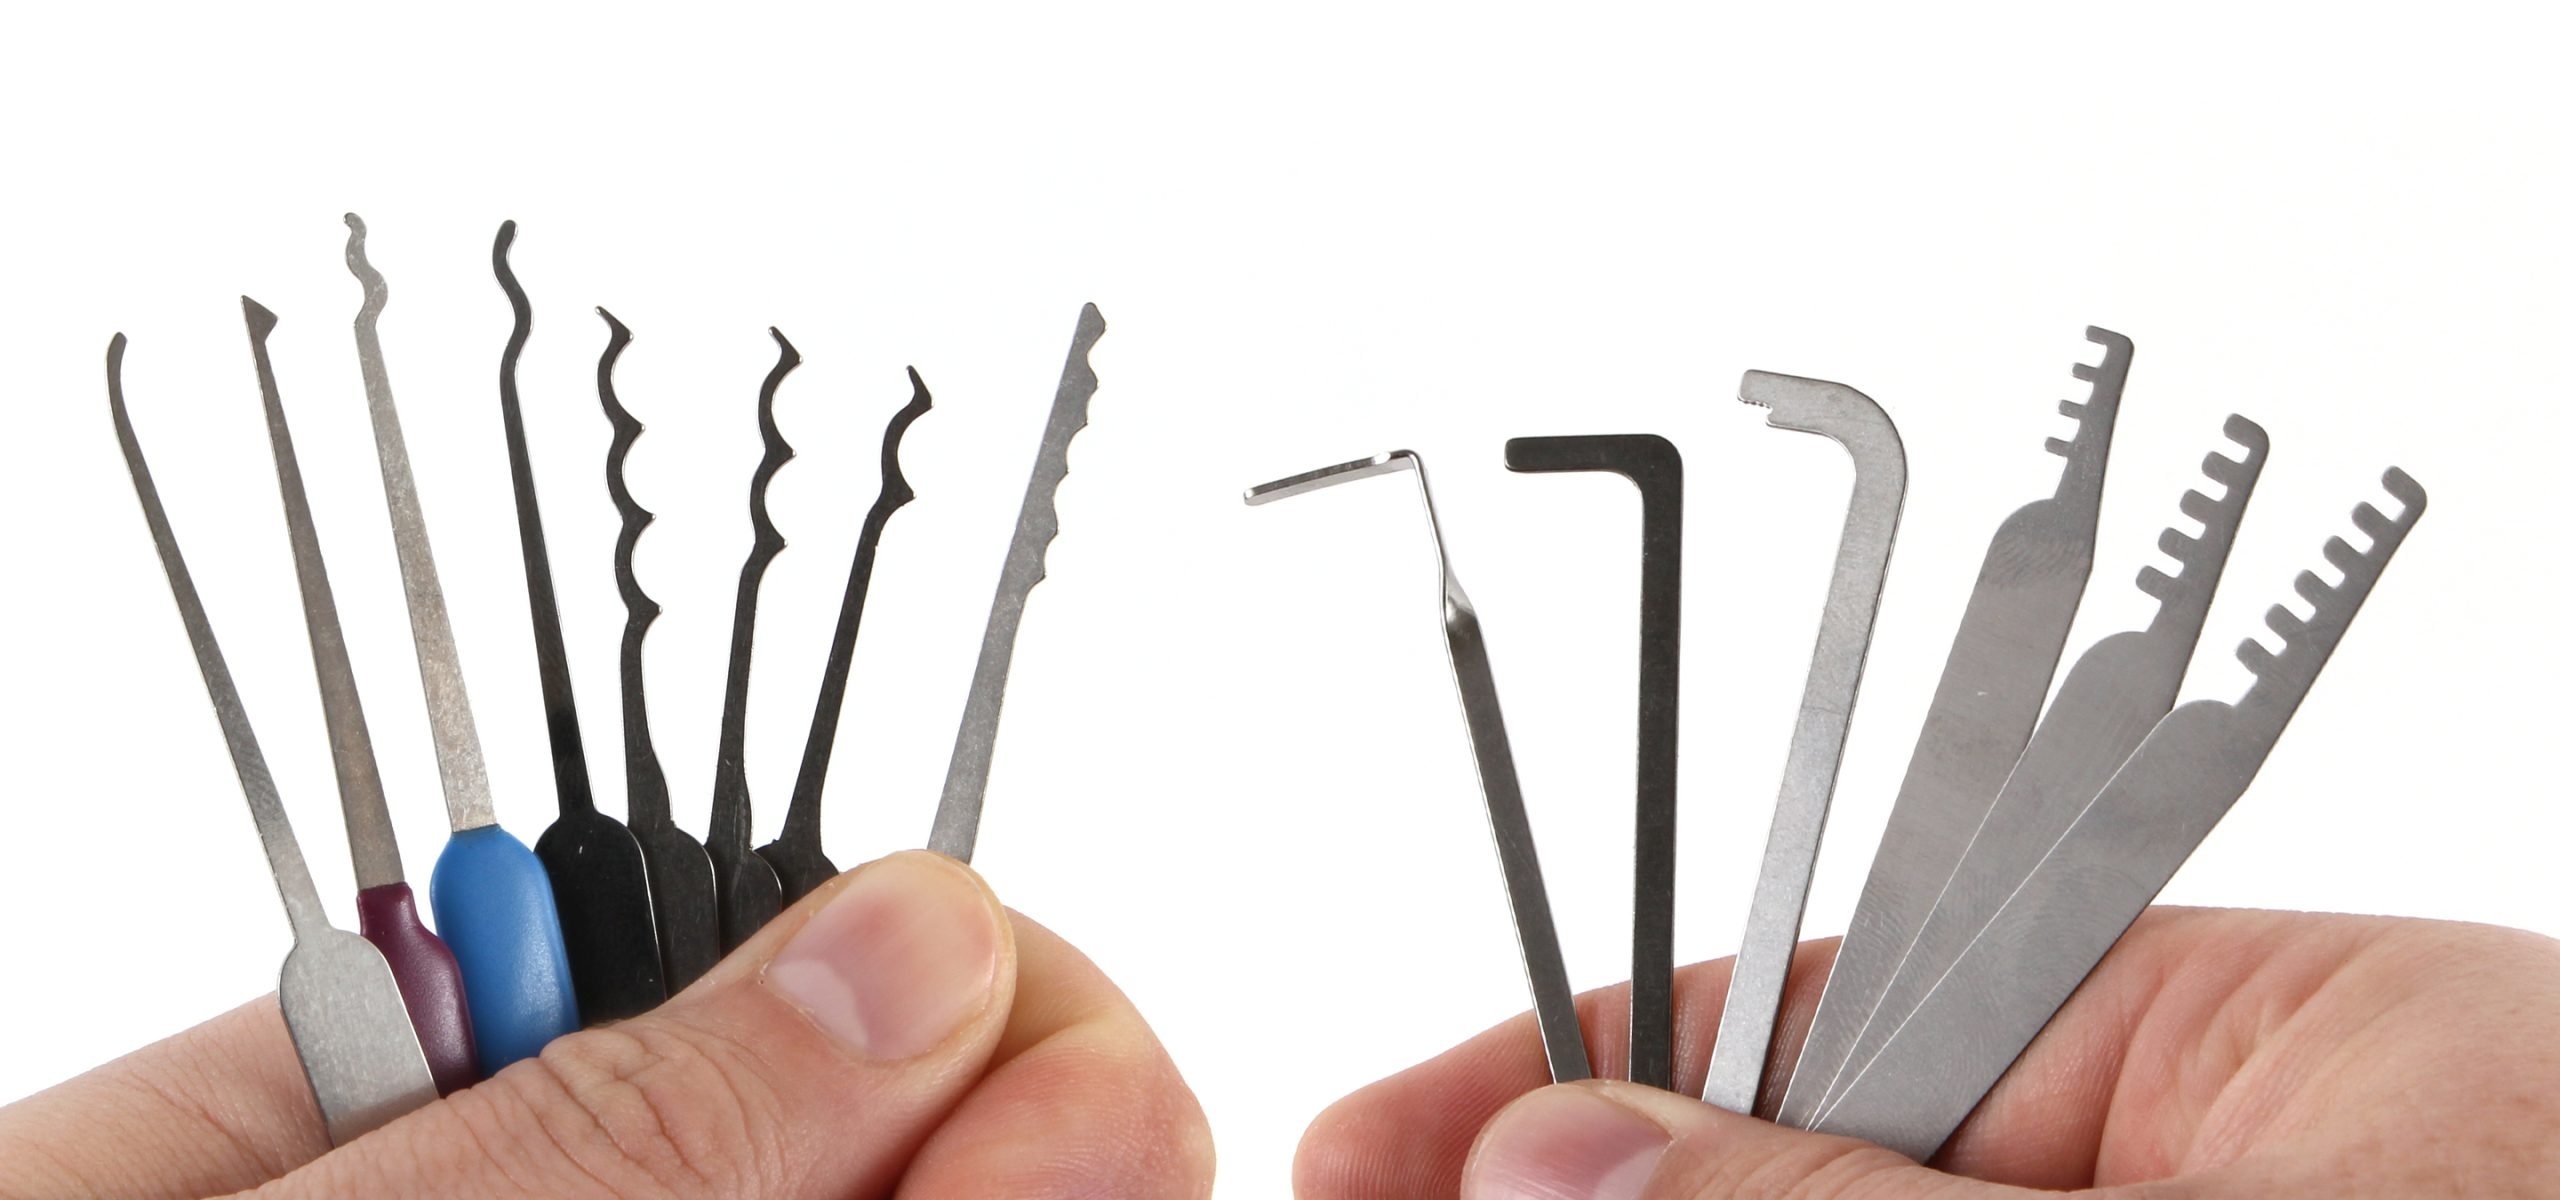 Getting Picky: Differences in Lock Pick Naming Conventions